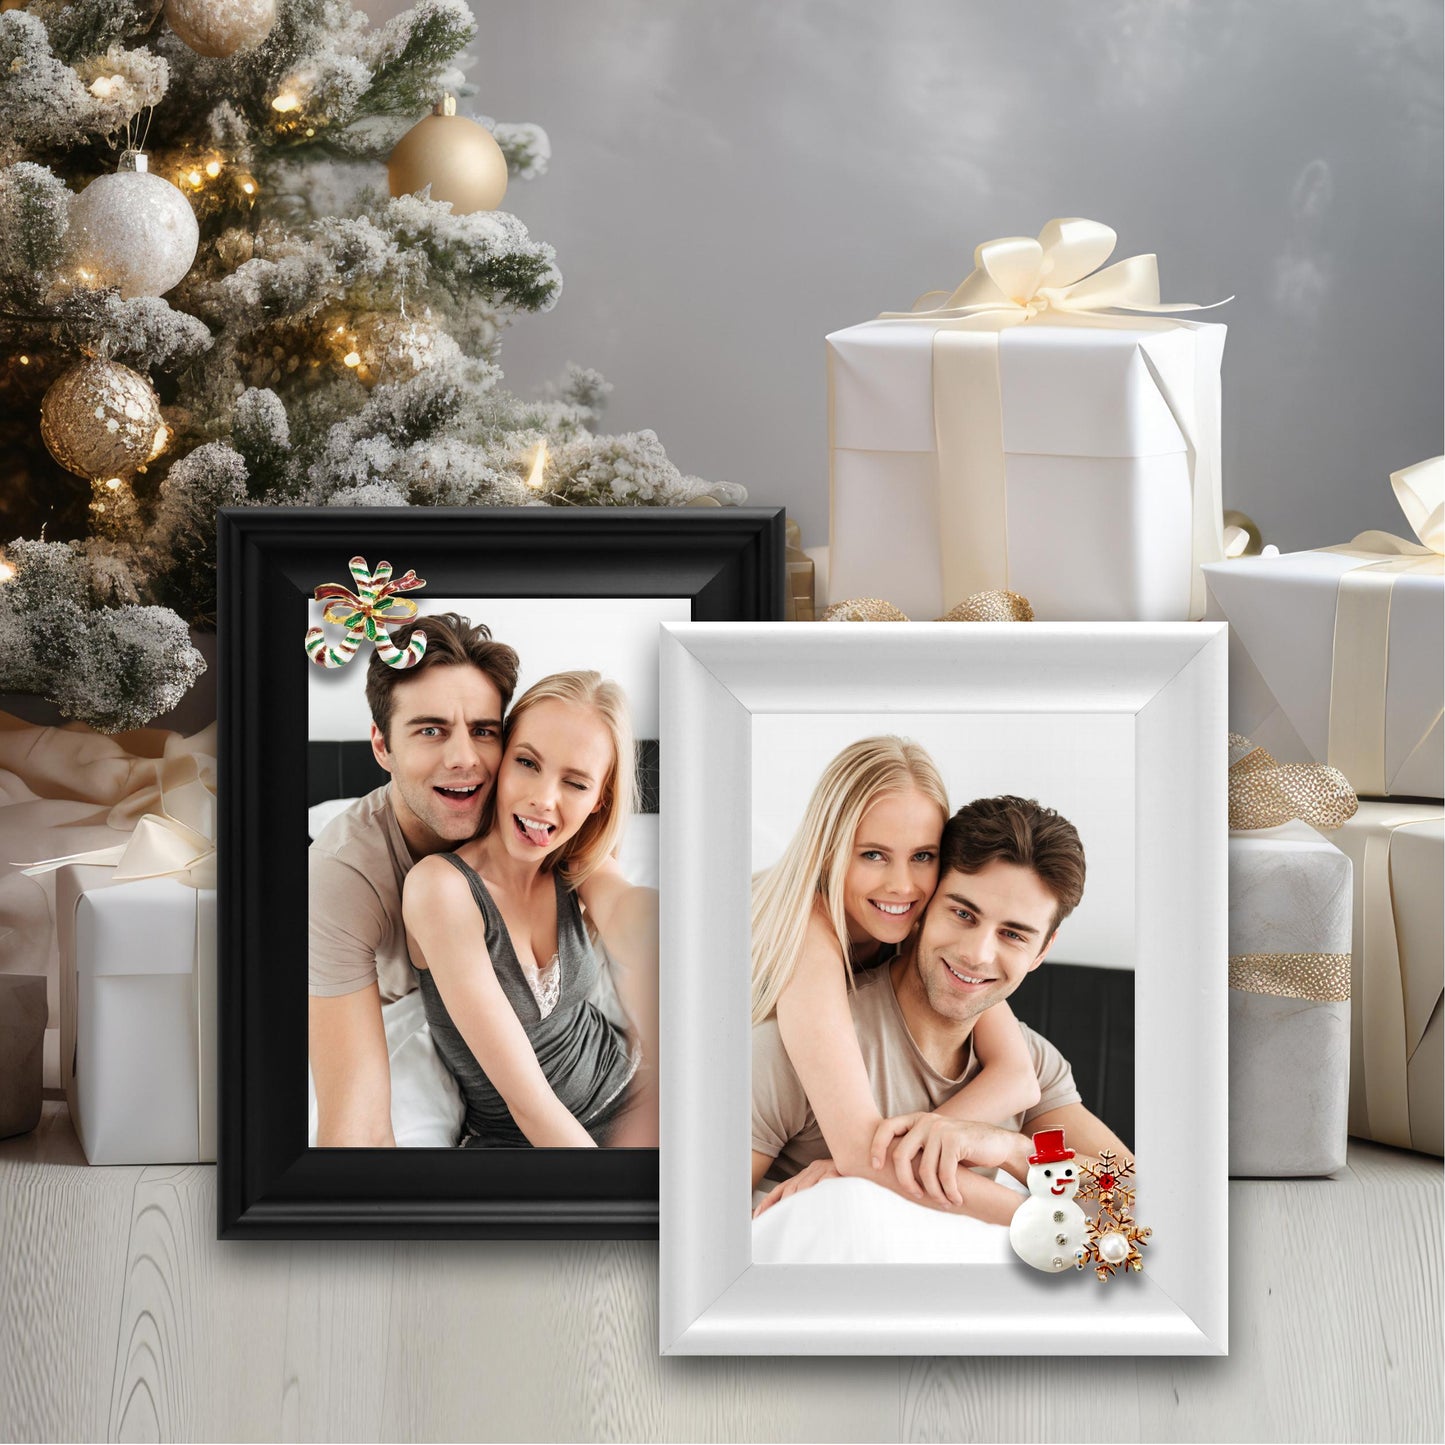 Christmas Picture Frame Photo Frame Embellished Gift for Wall and Tabletop Display (5x7 and 5x7, Black and White)